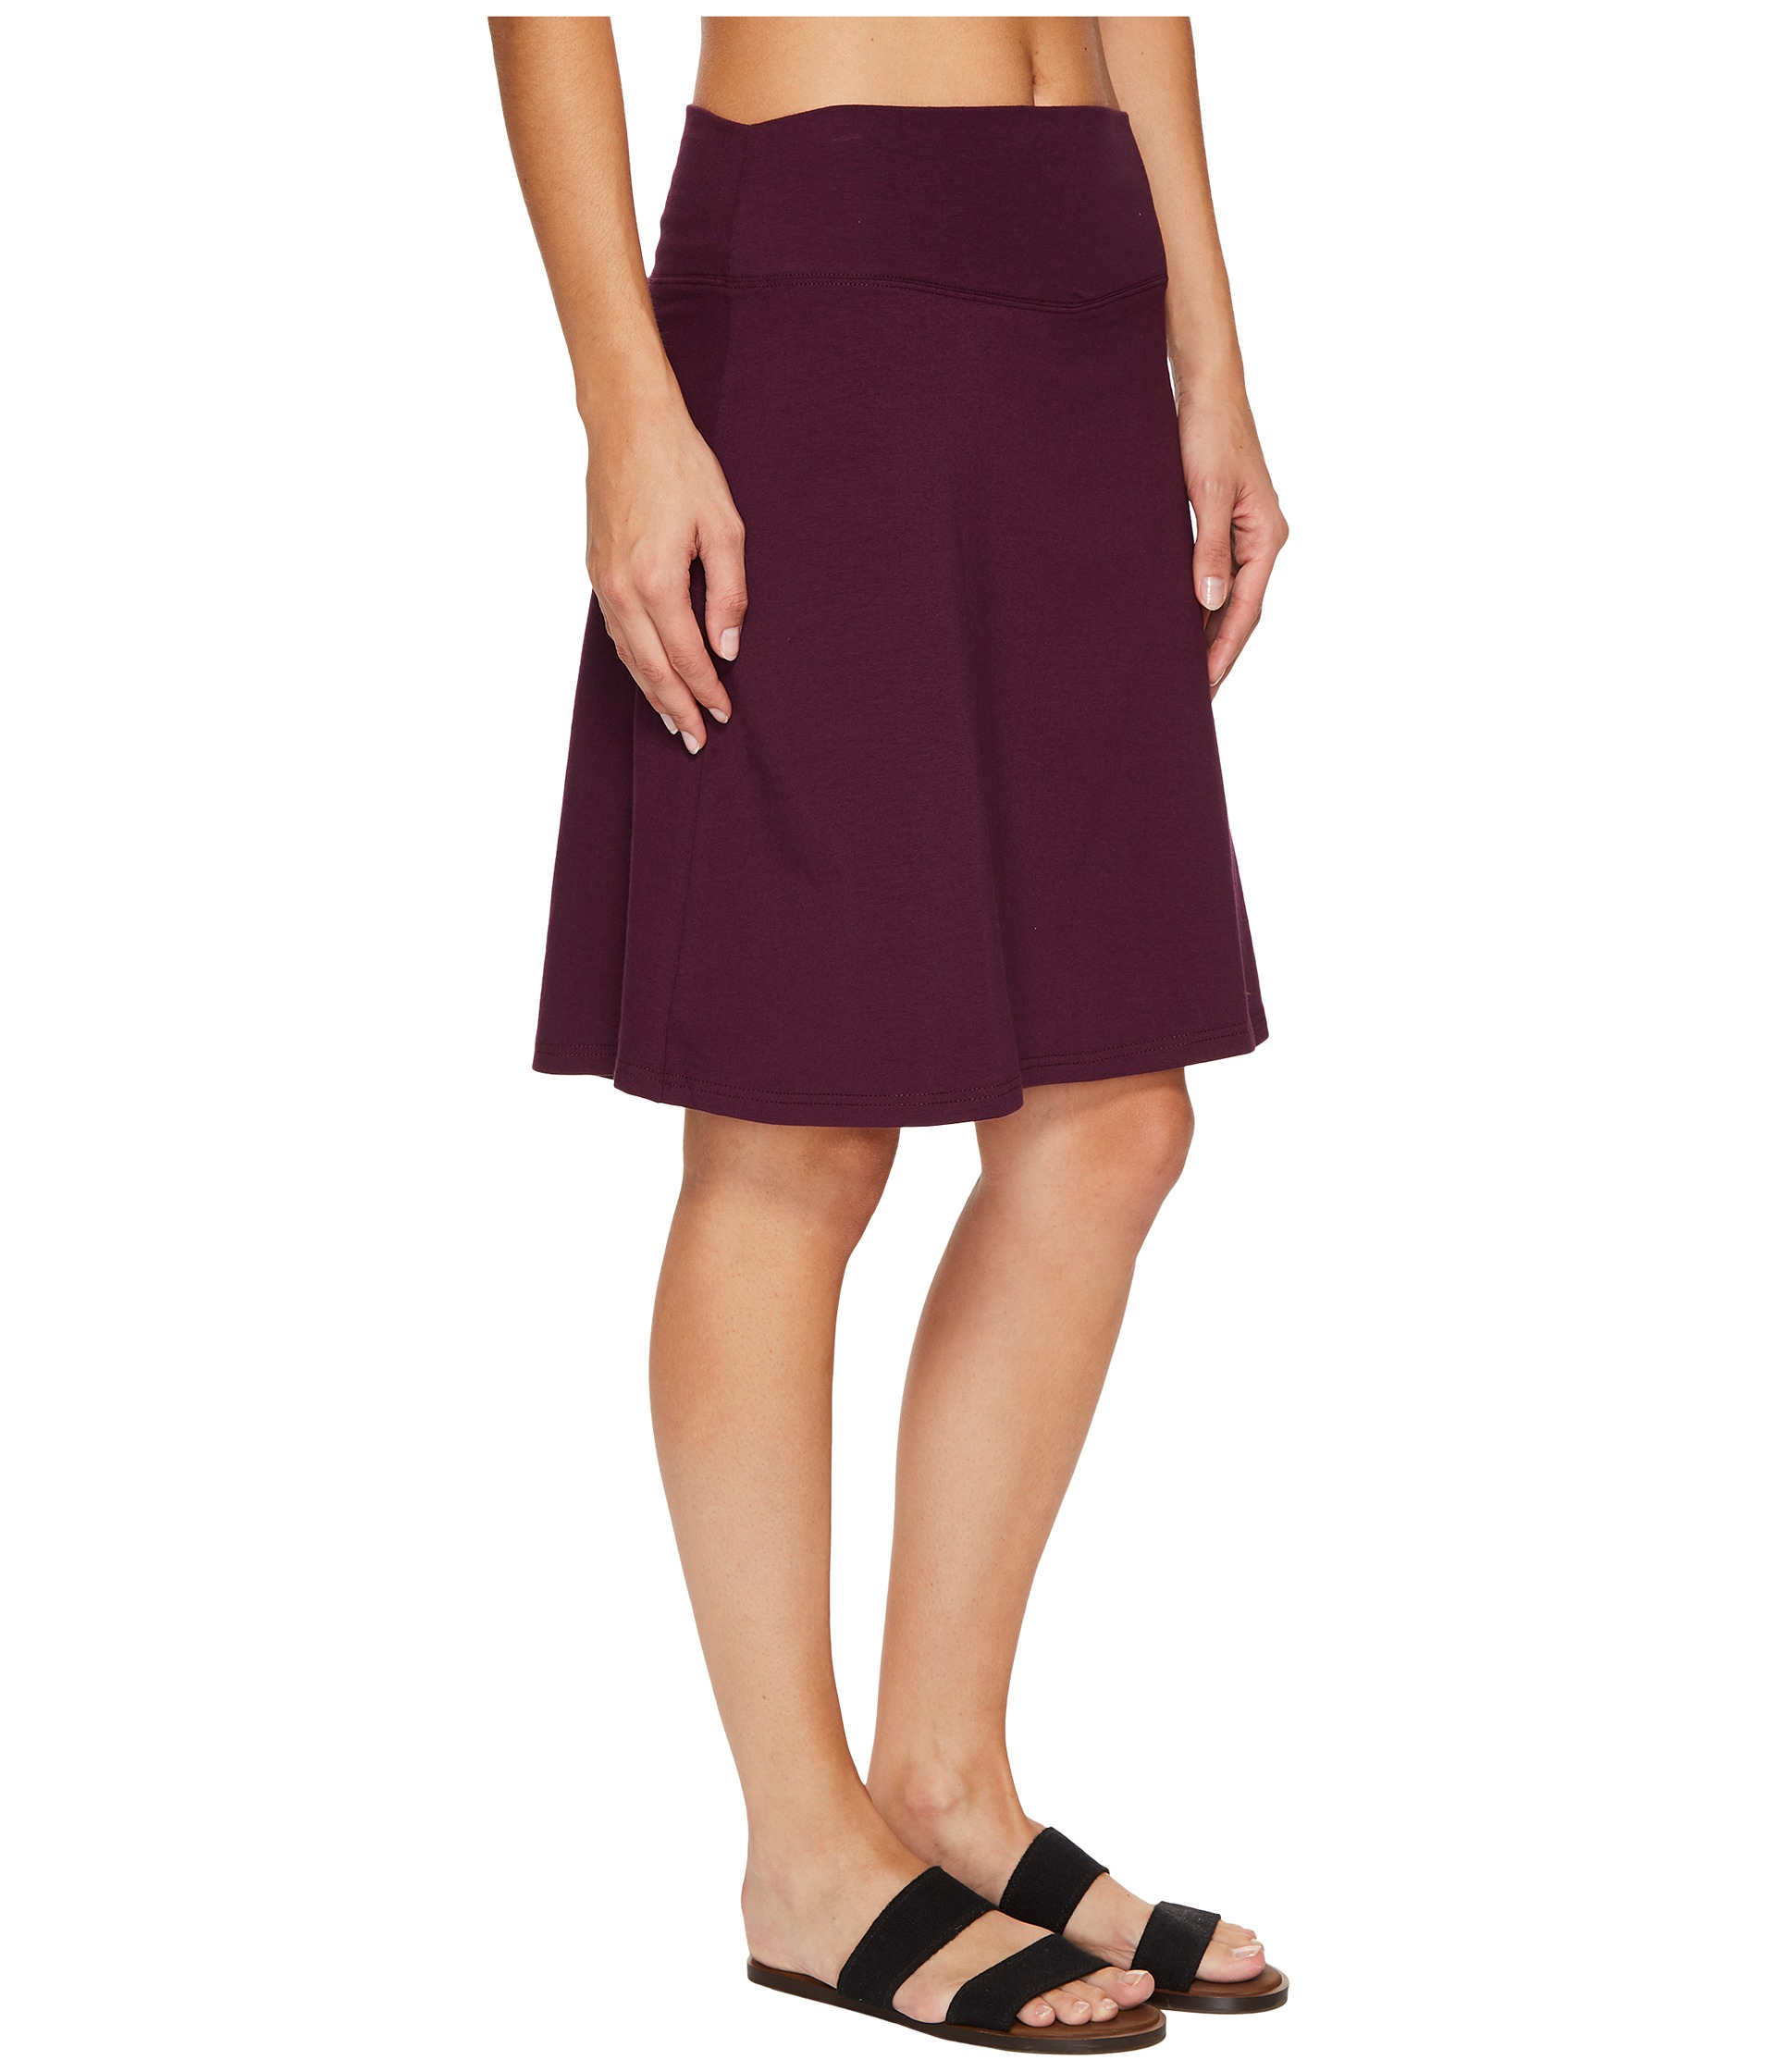 FIG Clothing Bel Skirt at Zappos.com